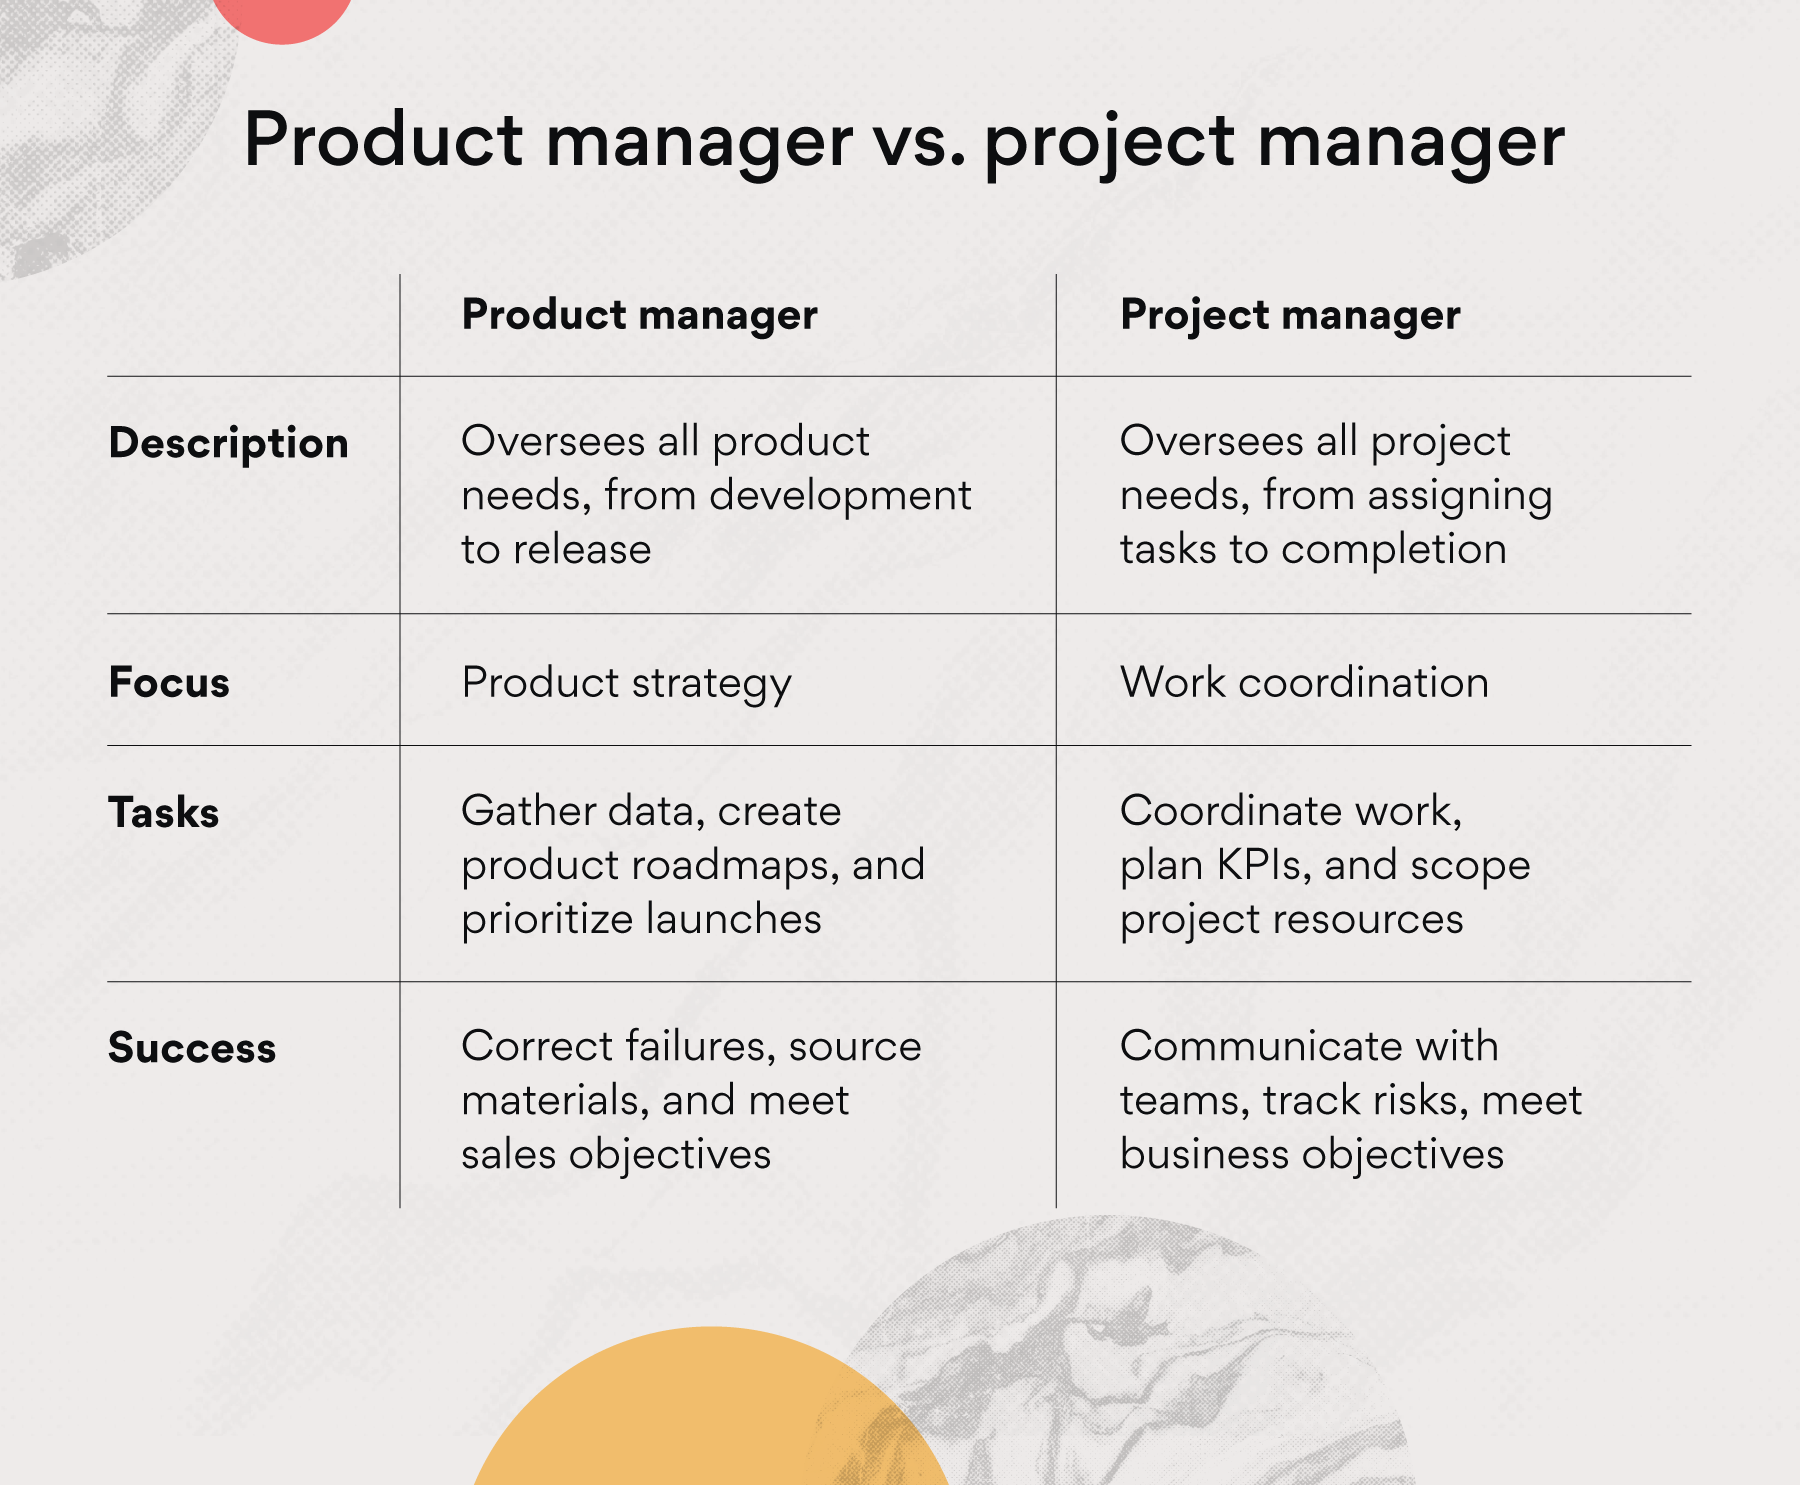 Product manager e project manager a confronto